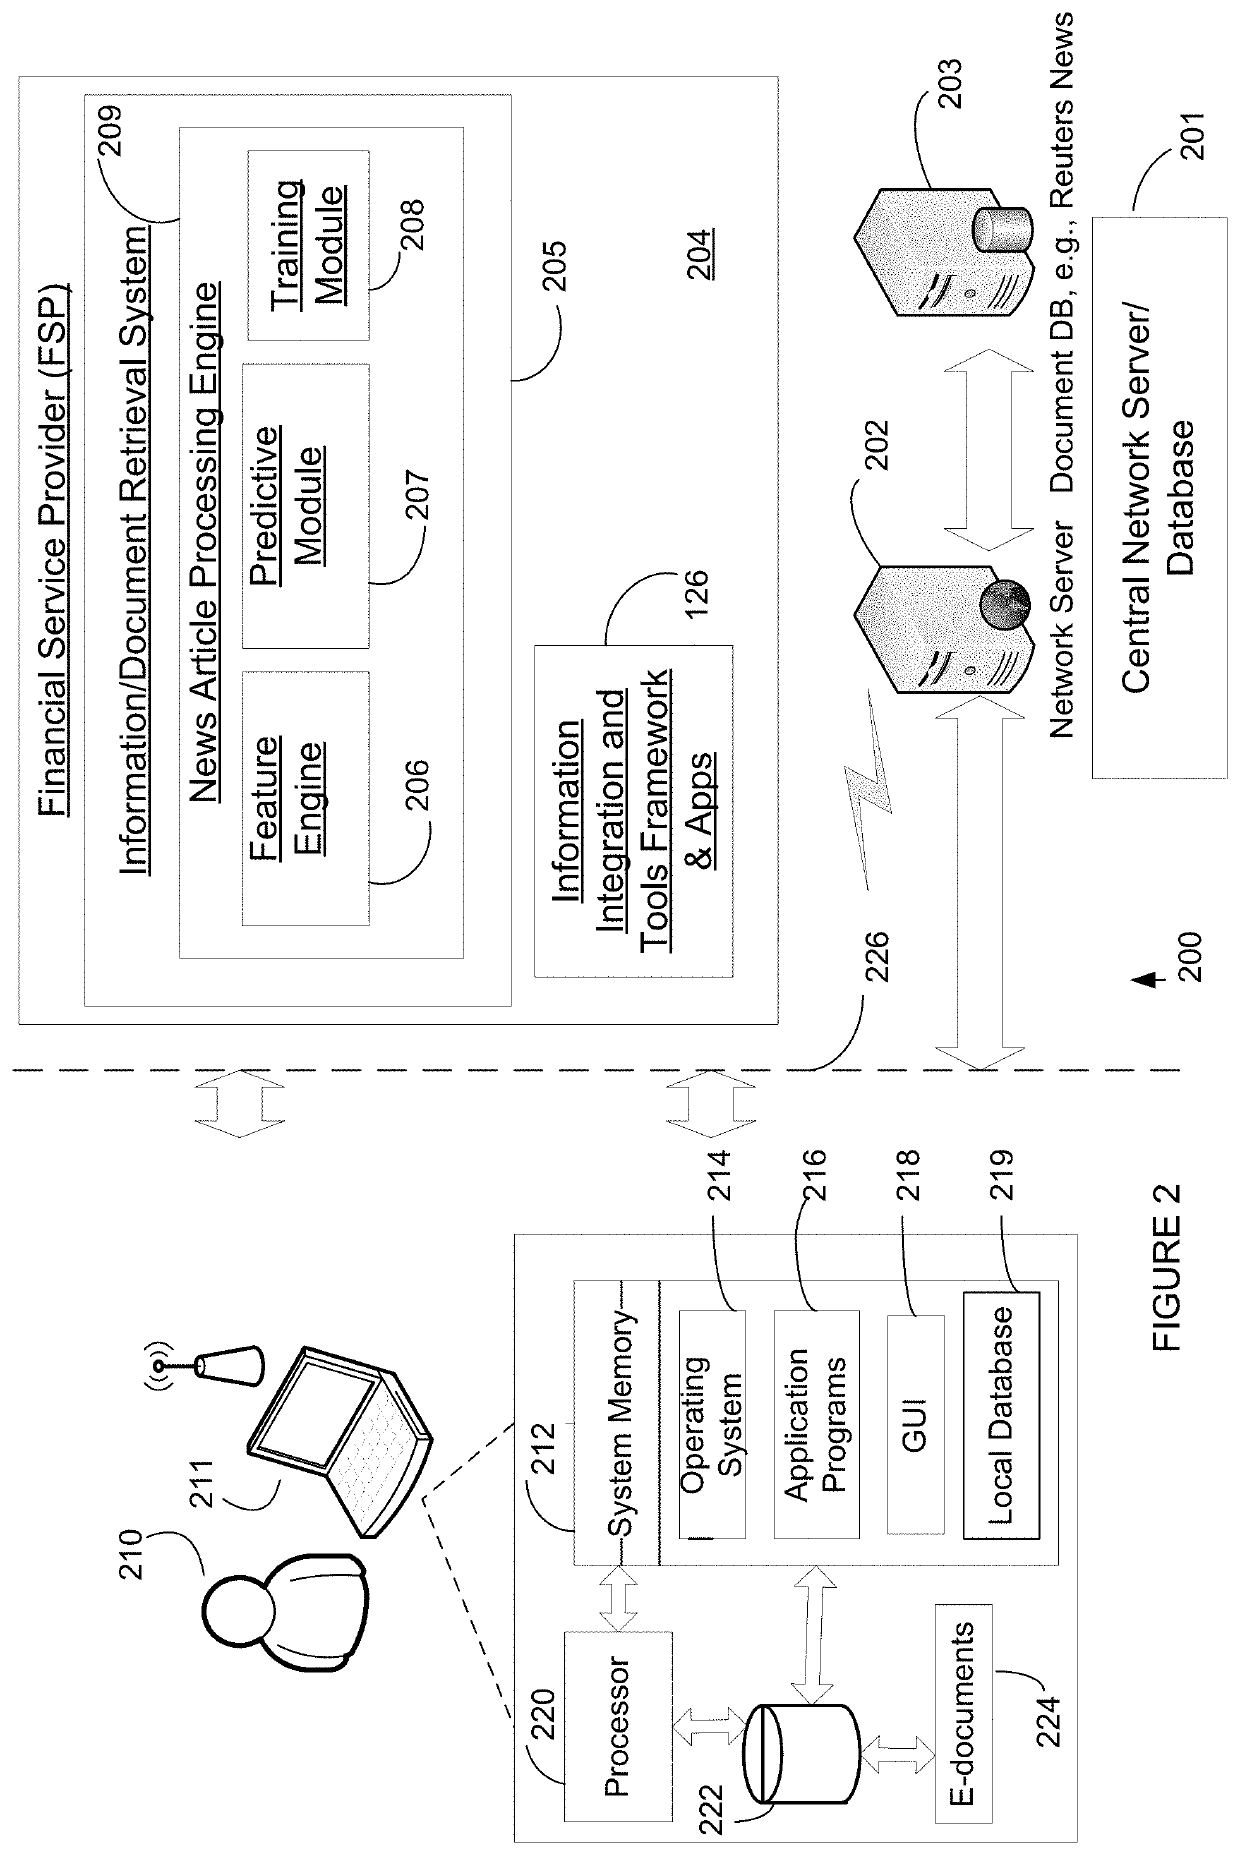 Methods and systems for predicting market behavior based on news and sentiment analysis